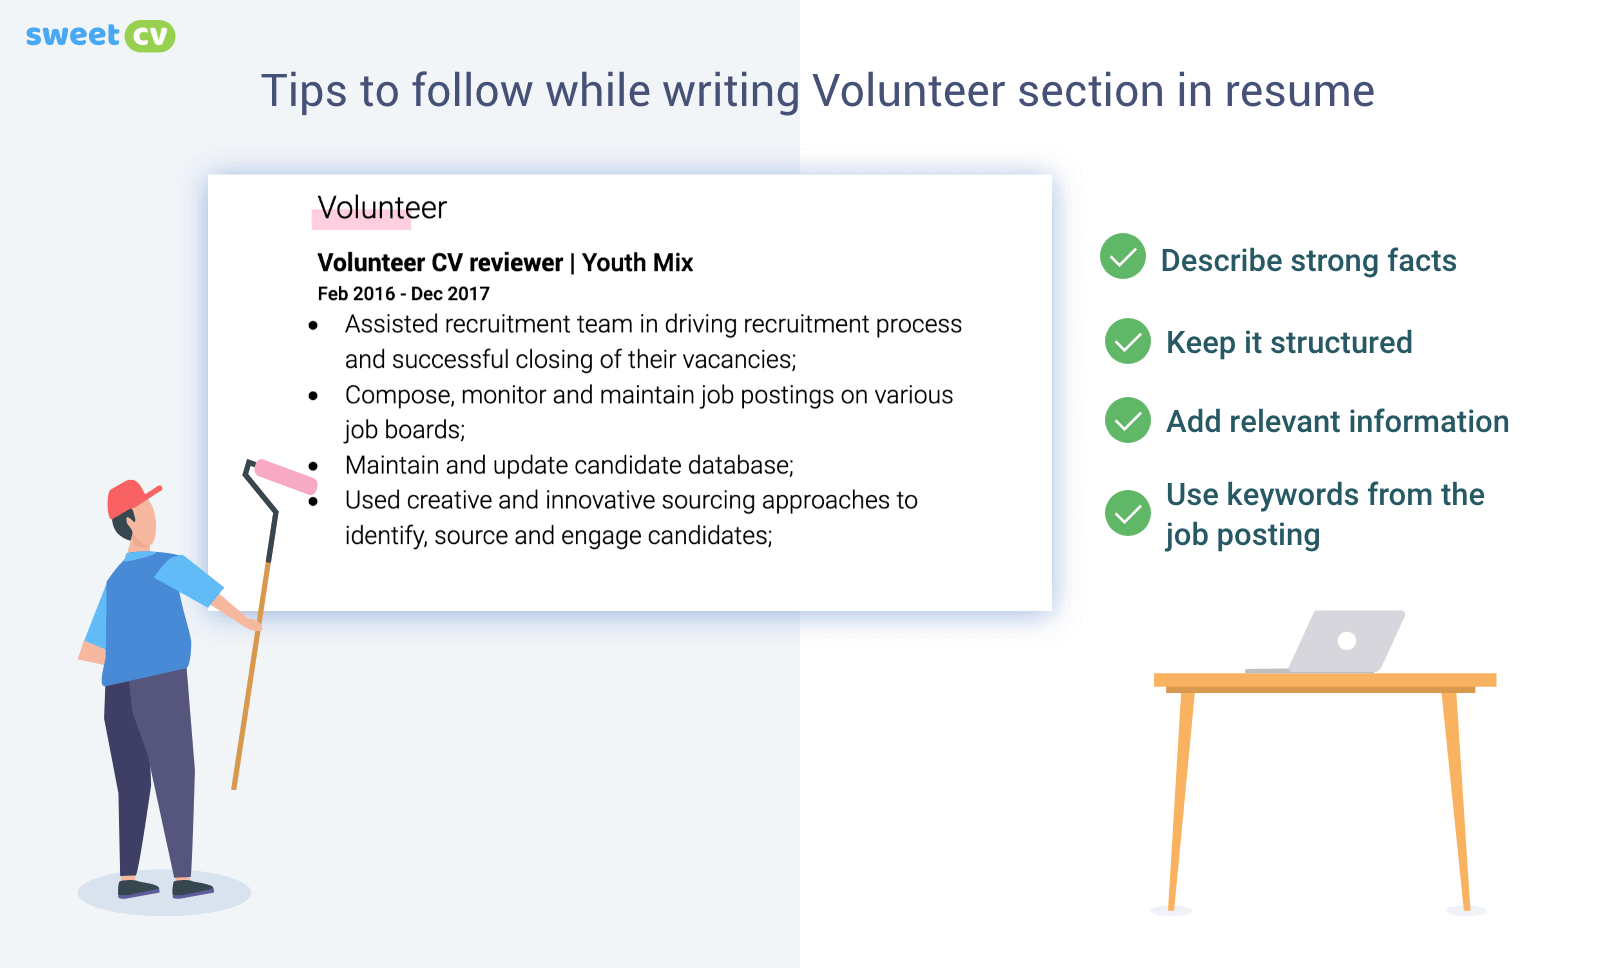 Tips while writing the Volunteer section in your resume